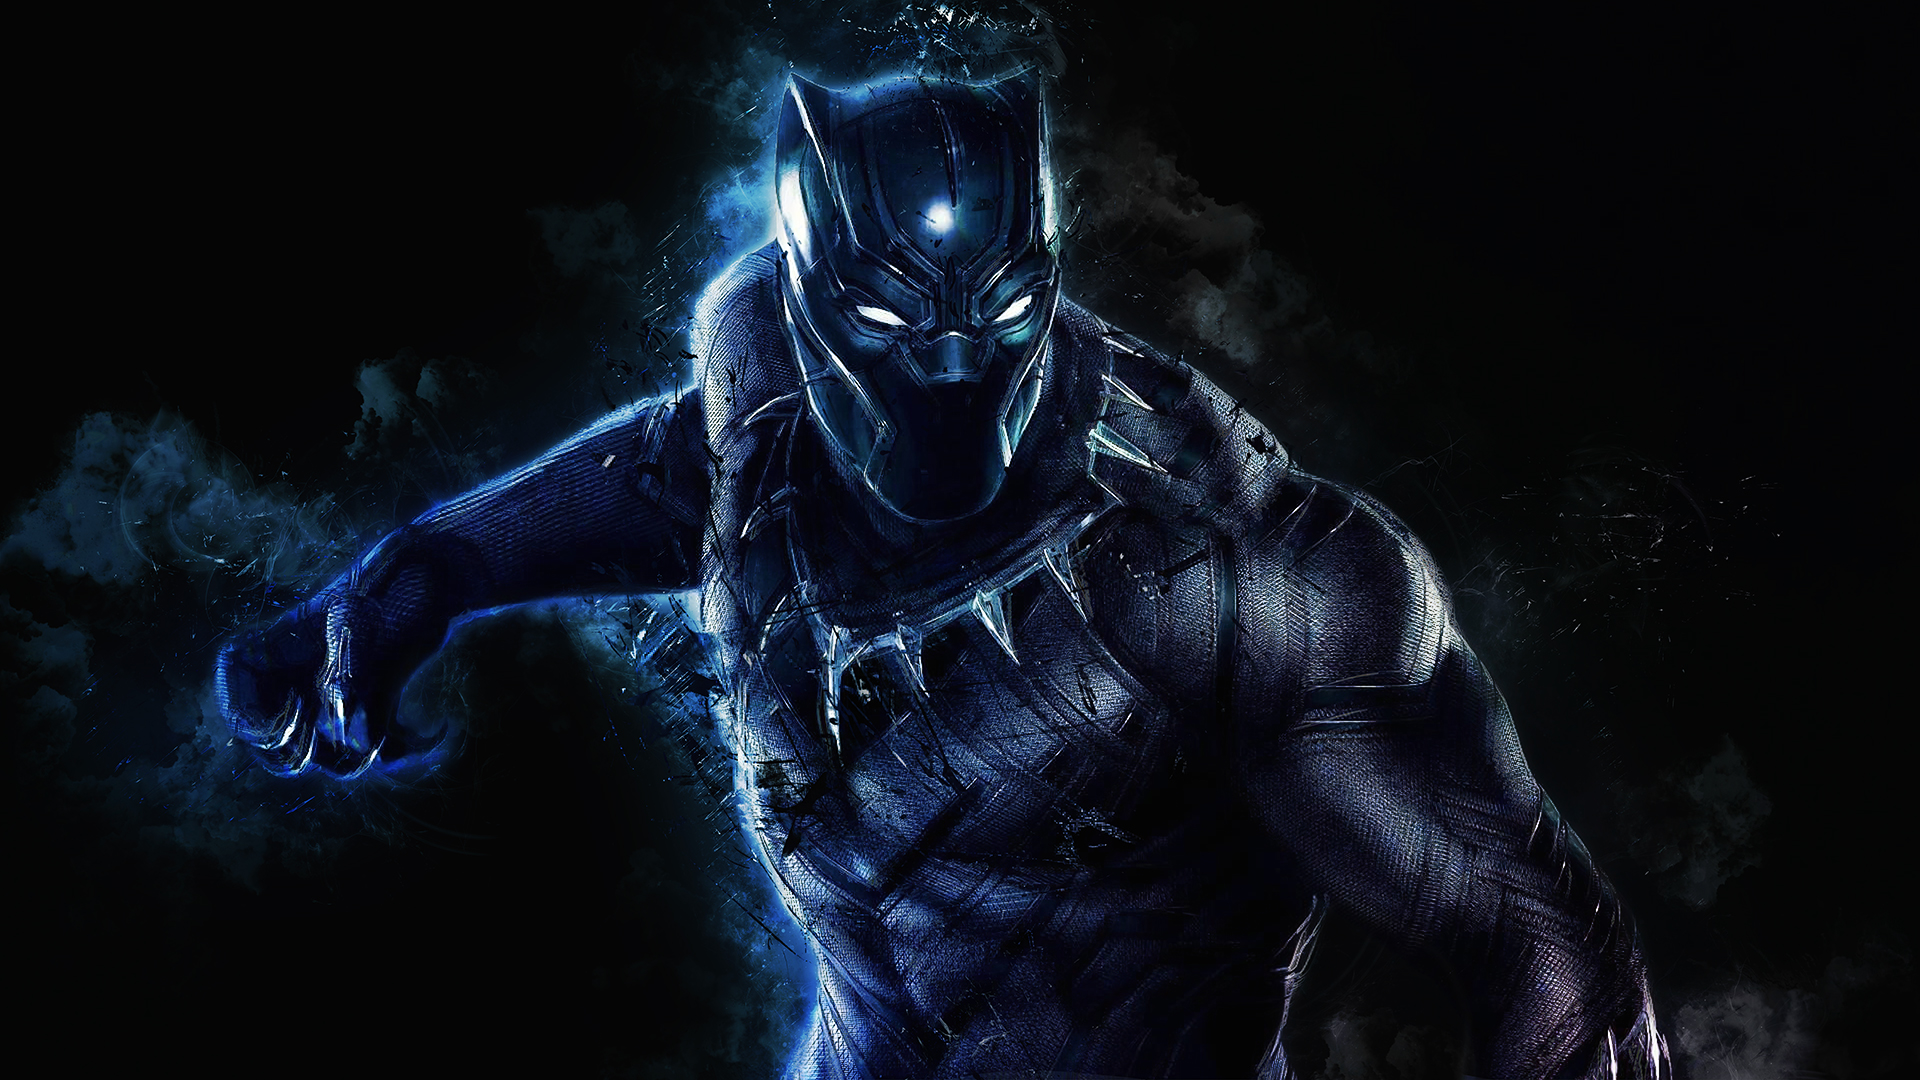 Black Panther for ios download